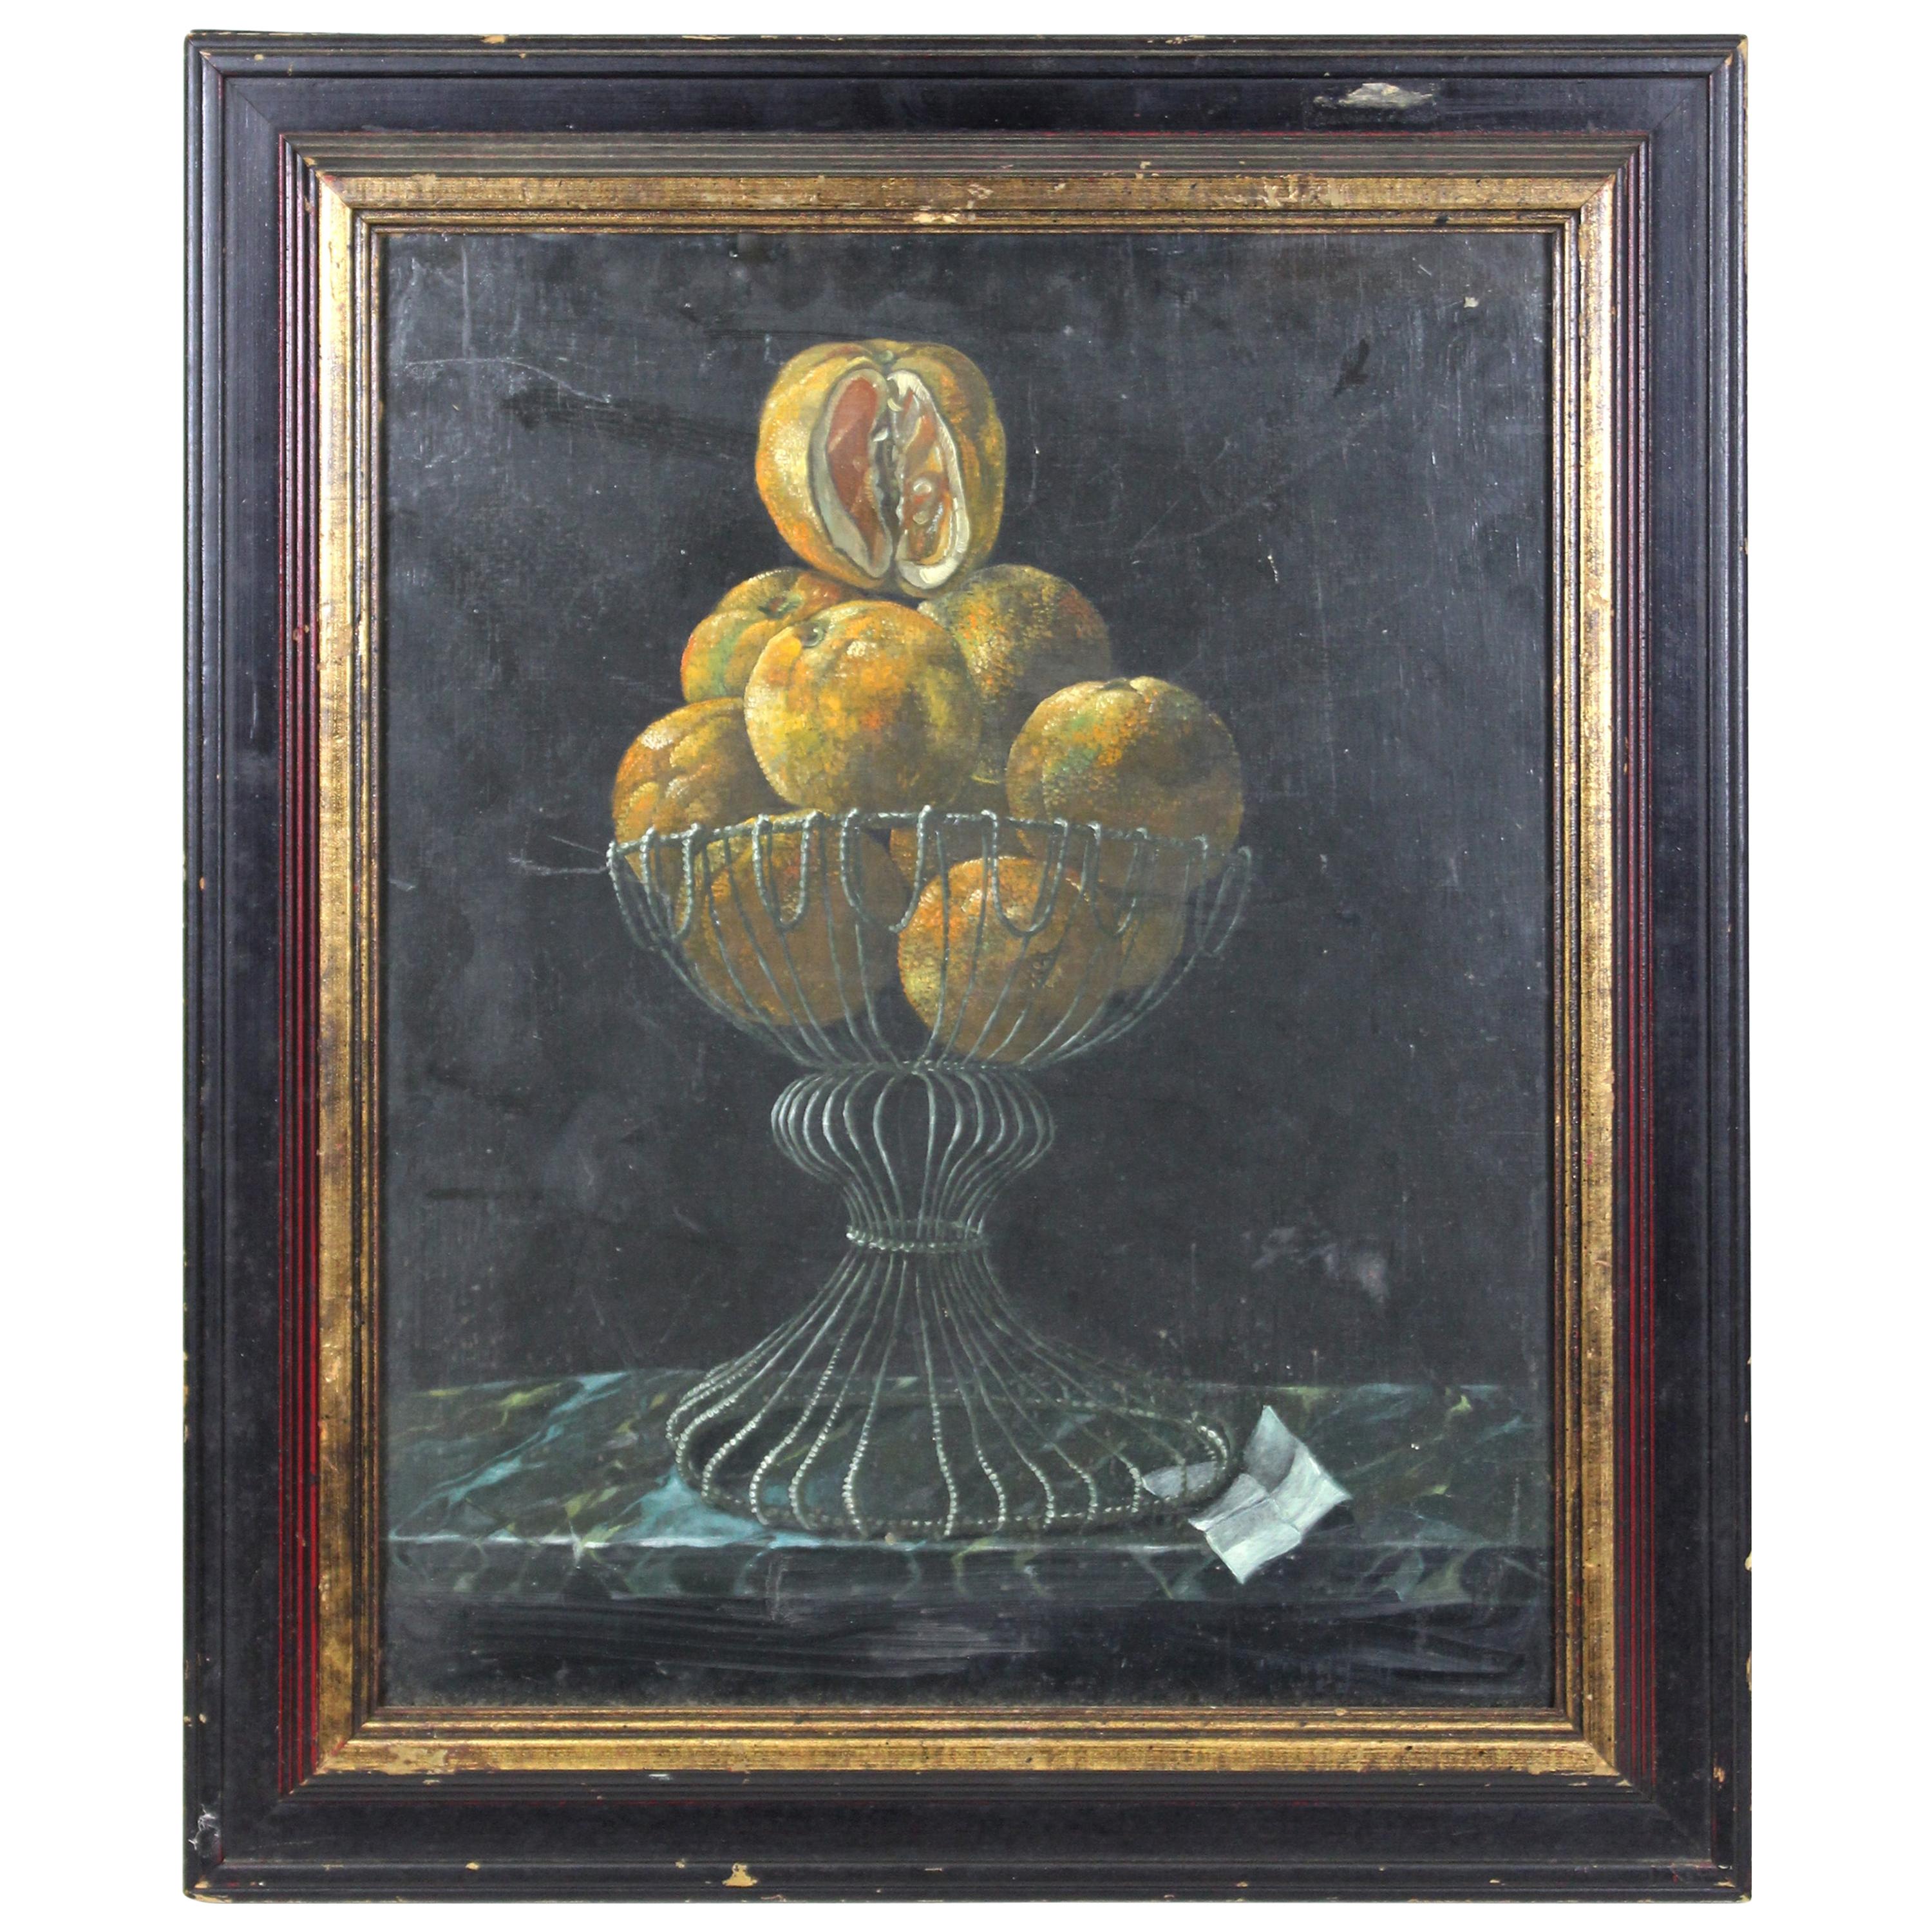 Dutch Style Still Life Oil Painting with Oranges and Metal Bowl